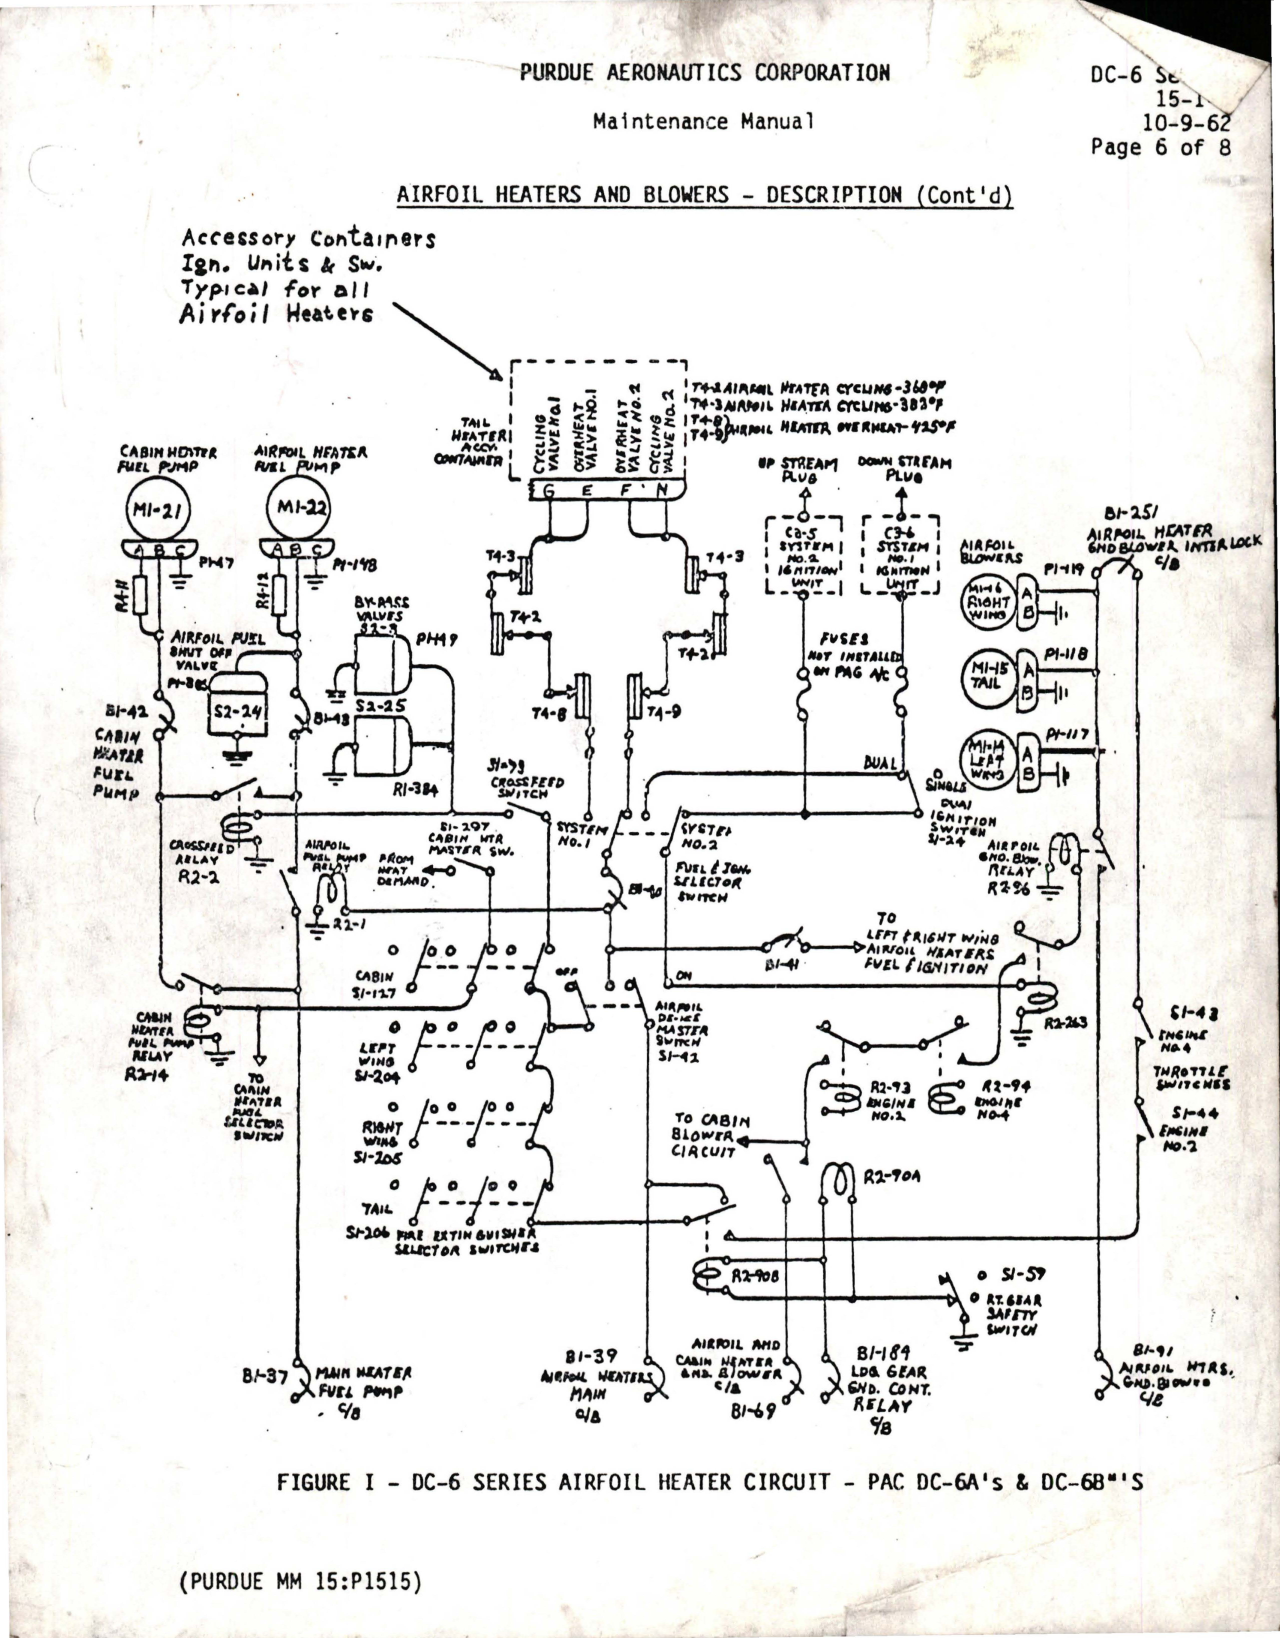 Sample page 1 from AirCorps Library document: Maintenance Manual for DC-6 Series